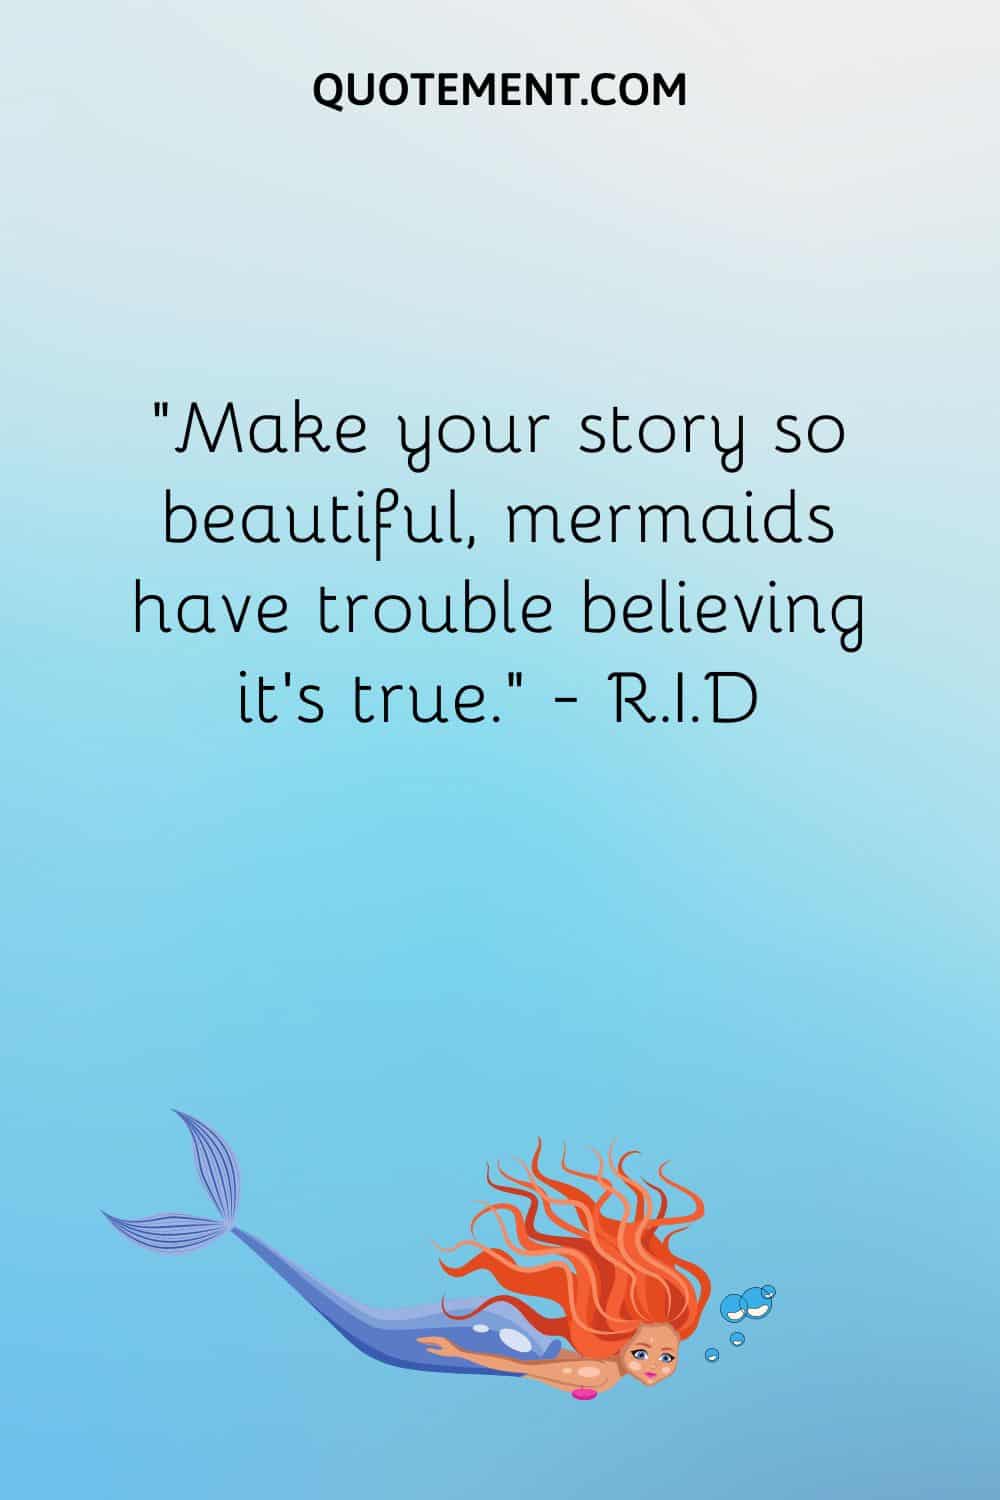 “Make your story so beautiful, mermaids have trouble believing it’s true.” ― R.I.D